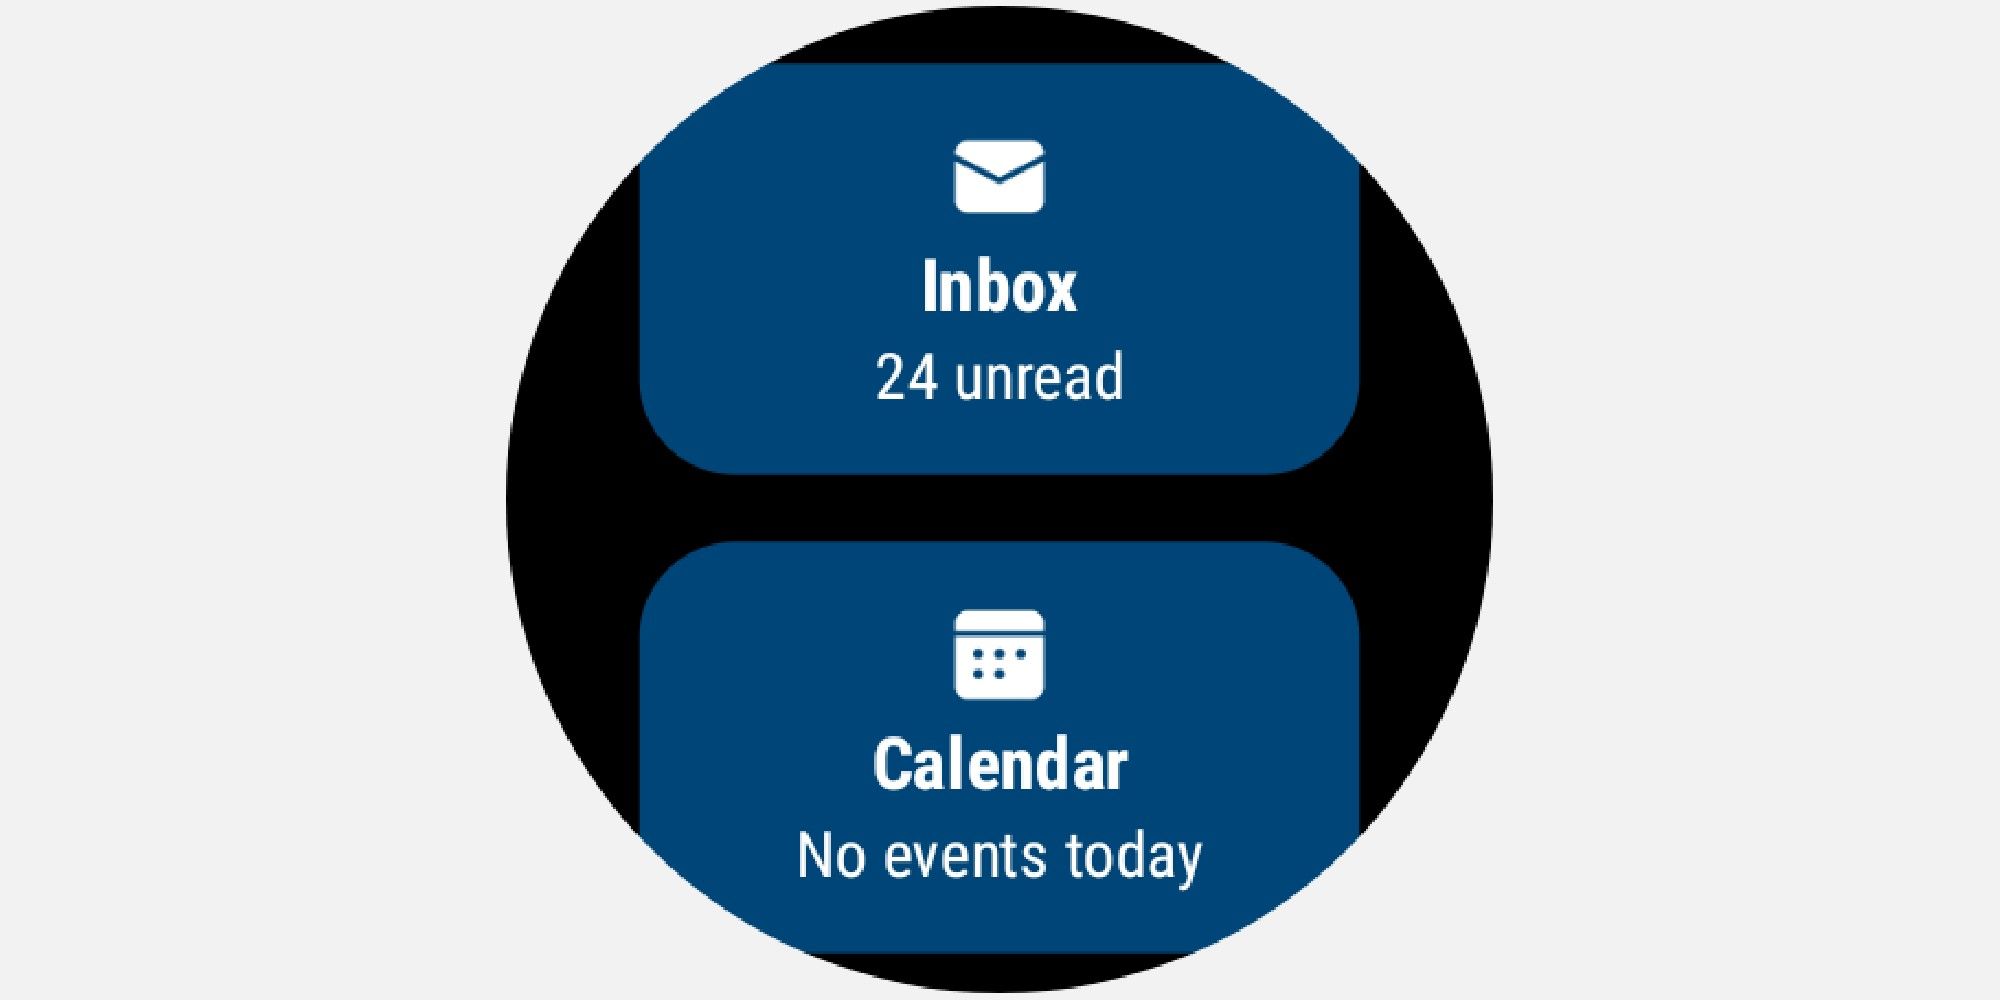 Calendar and inbox functionality in MS-Outlook